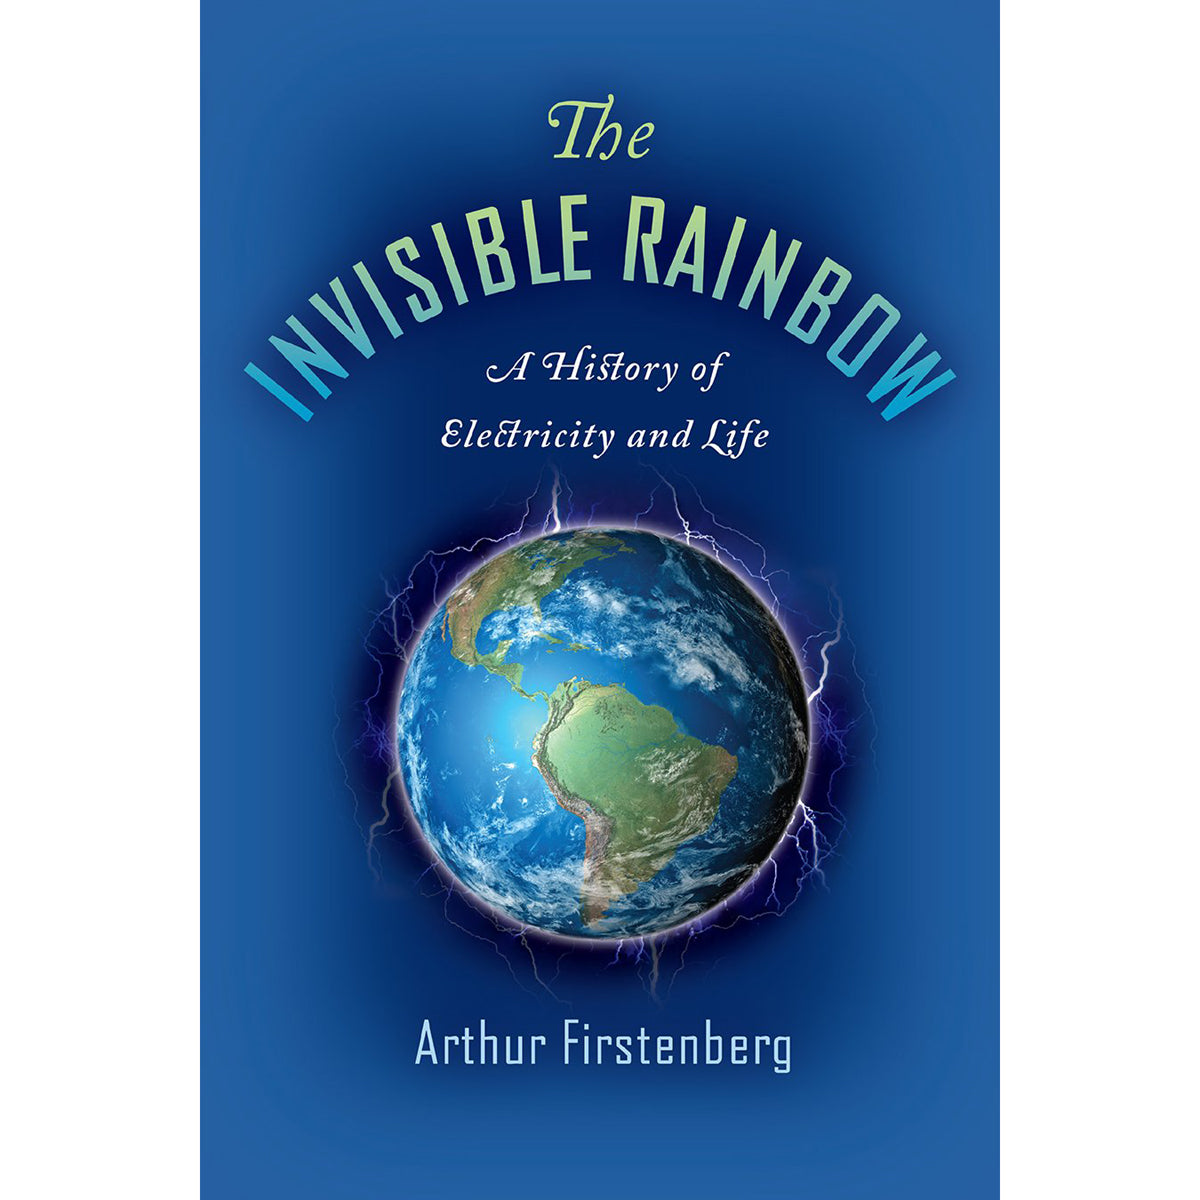 The Invisible Rainbow, A History of Electricity and Life